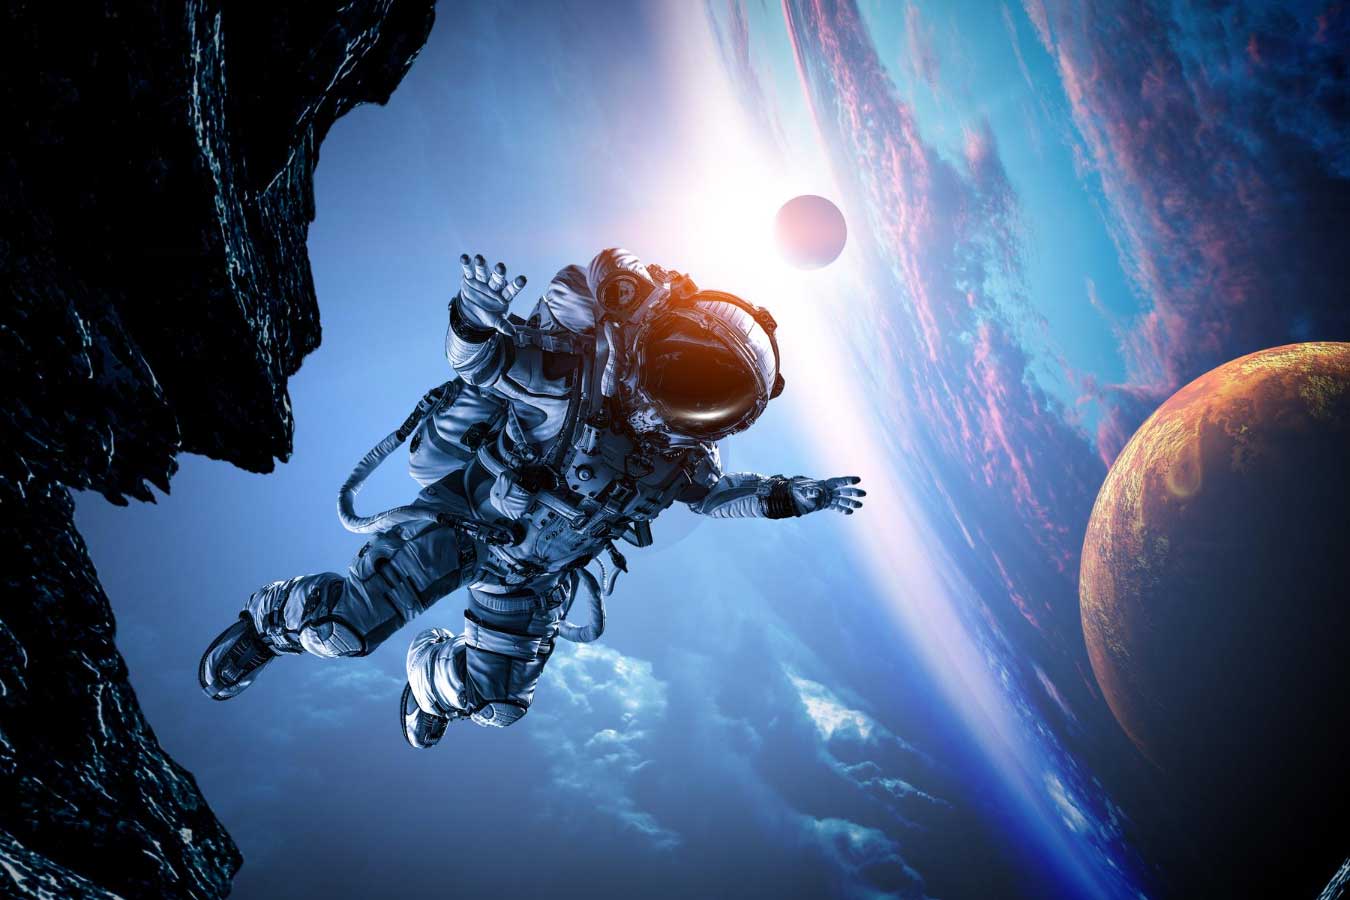 Space missions may increase male astronomers’ risk of erectile dysfunction thumbnail